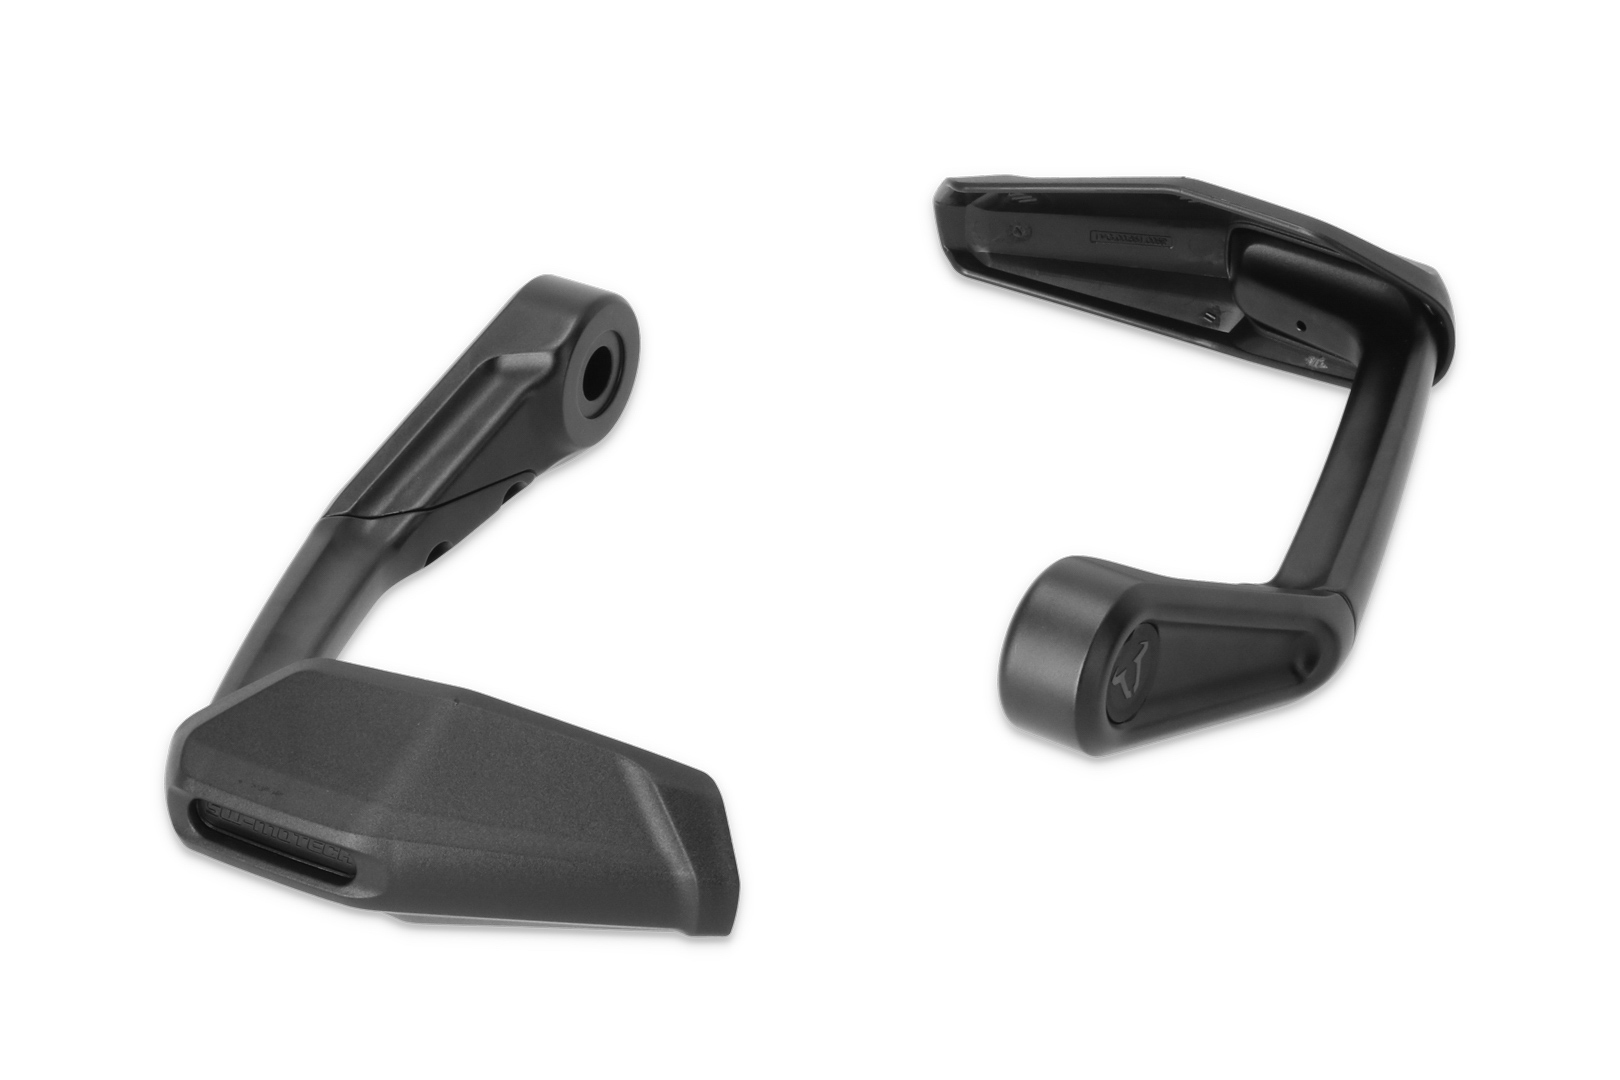 SW-Motech Lever guards with wind protection - Black. BMW R 1250 R, F 900 XR/F 900 R, S 1000 R.